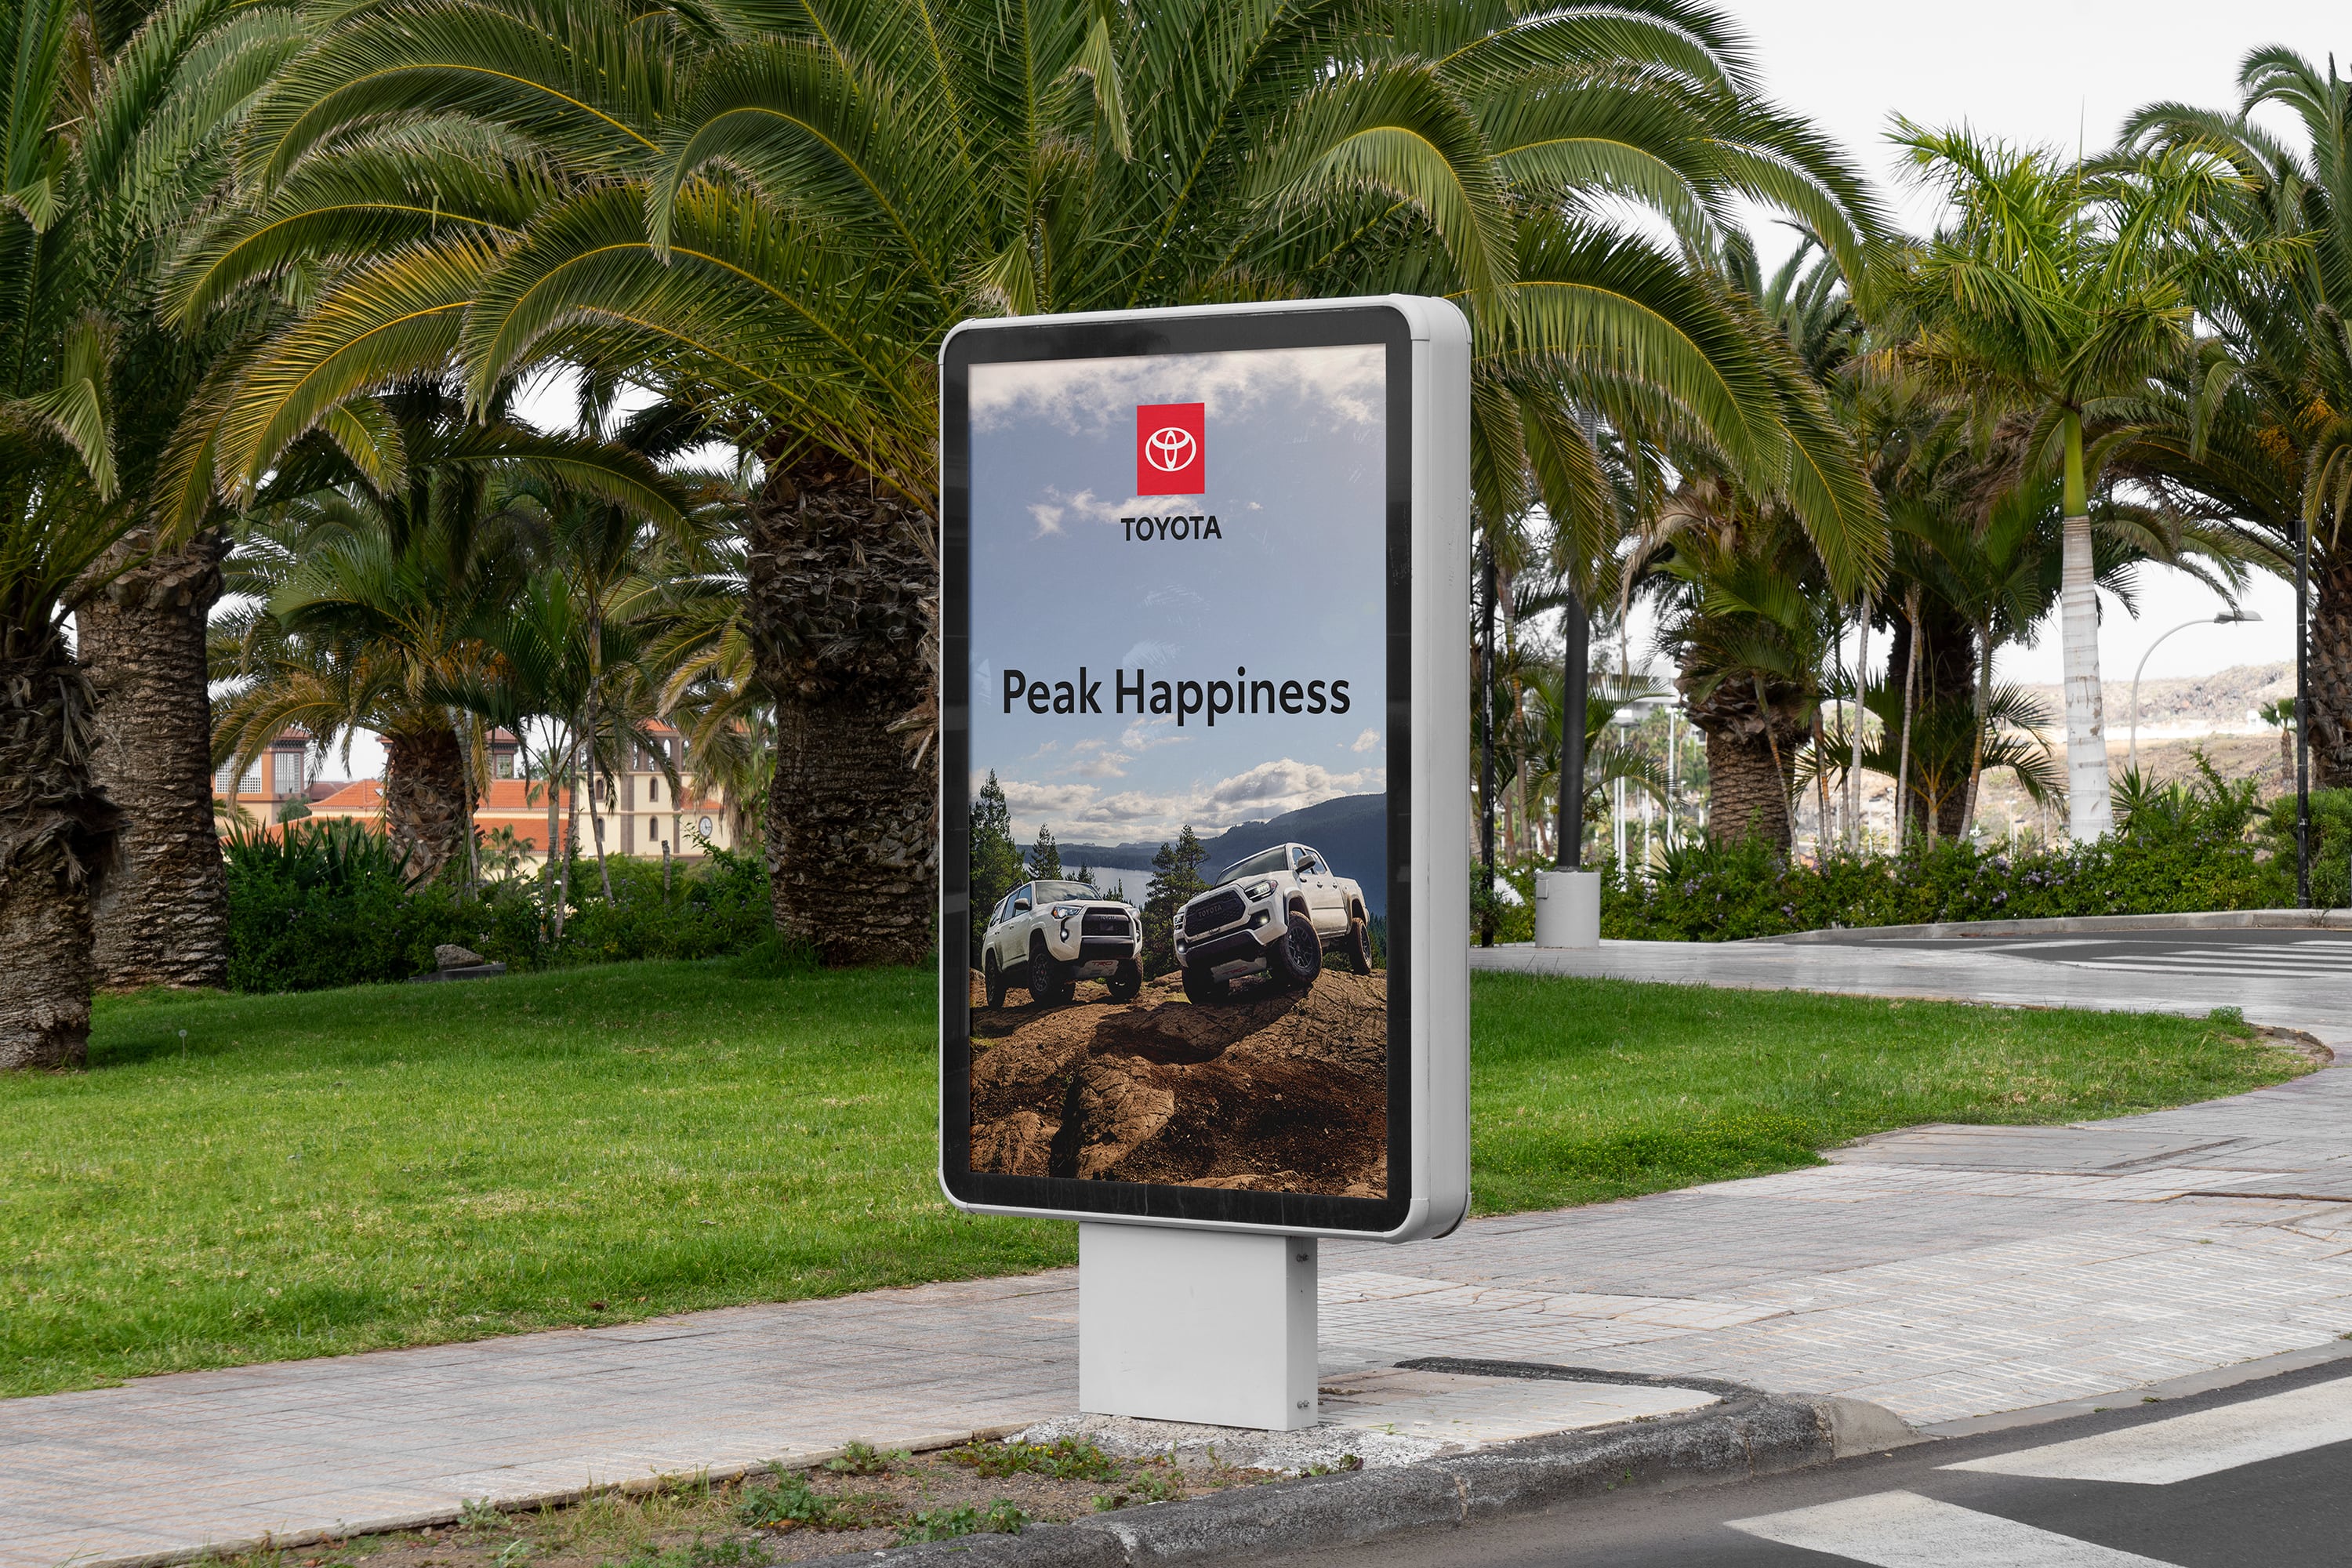 A digital out-of-home sign in a park displays an add with the Toyota logo, headline and two Toyota trucks atop a mountain.